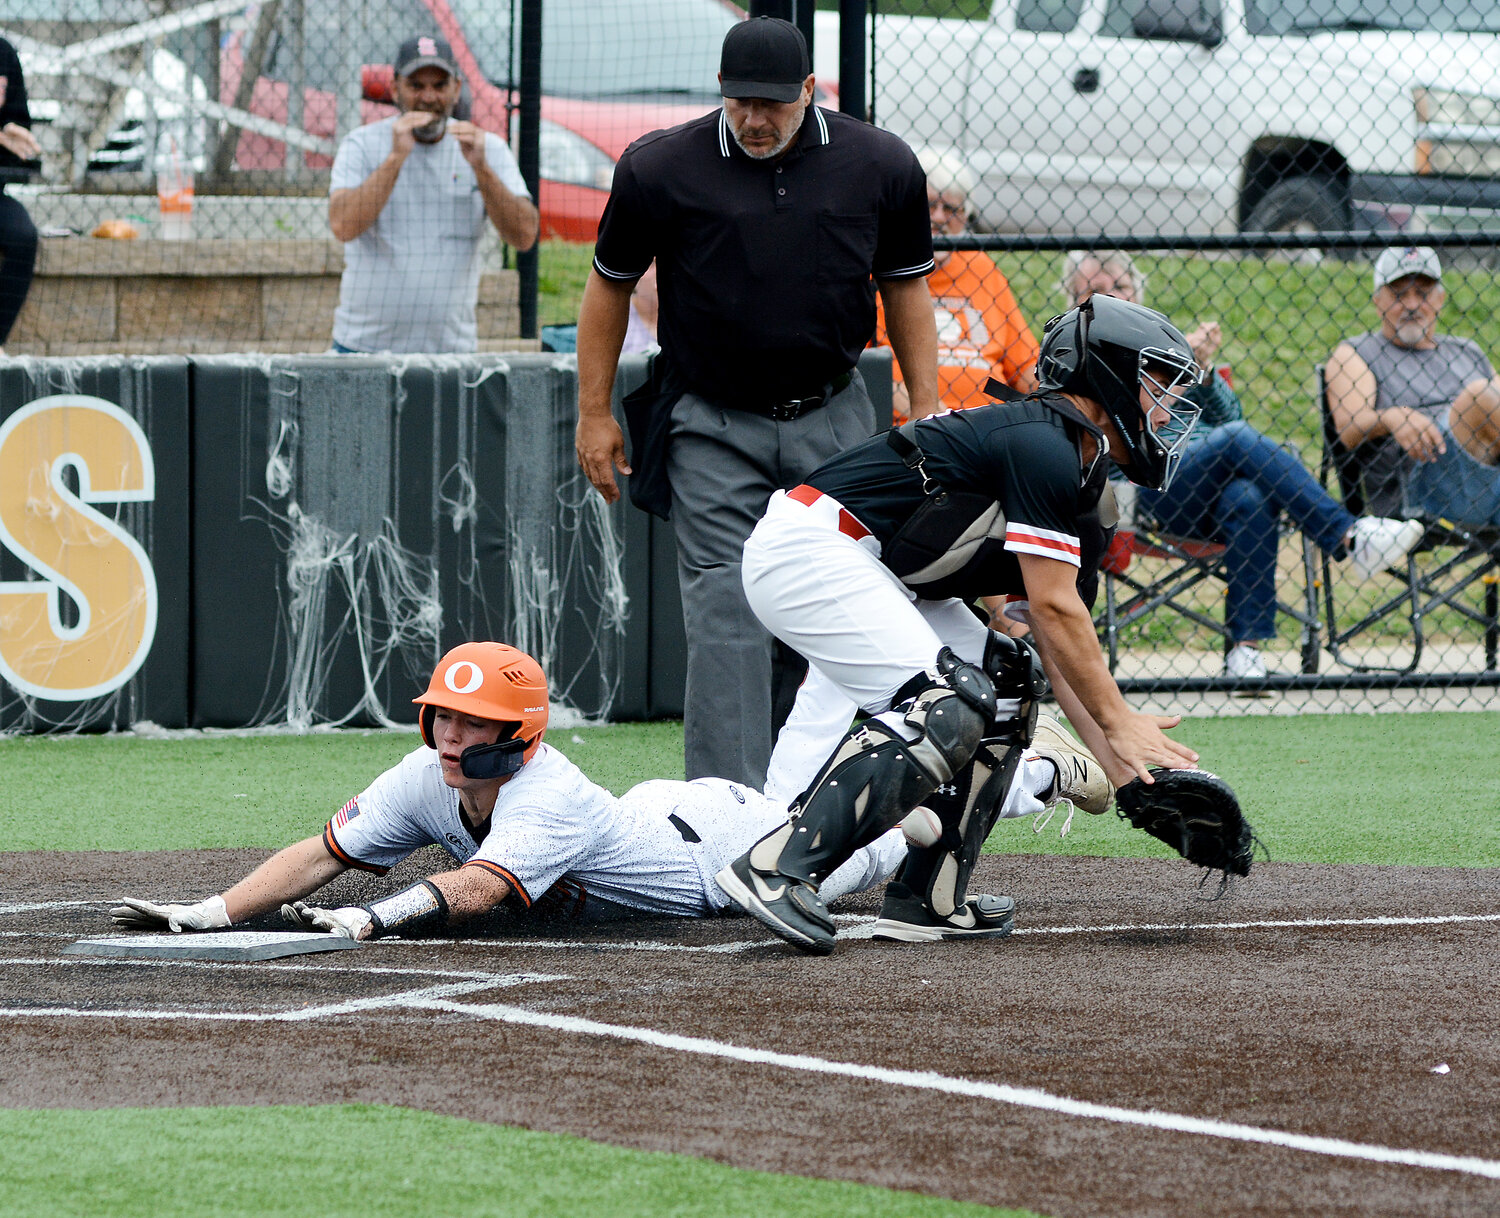 Landon Kramme slides safely into home while the baseball gets by St. James catcher Travis Hall during the top of the second inning of Owensville’s 6-4 district-semifinal loss to the Tigers at OHS Field. Sullivan won the other semifinal over Salem 8-2 and will face St. James tomorrow (Thursday) at 4 p.m., in the Missouri State High School Activities Association (MSHSAA) Class 4, District 4 championship game.